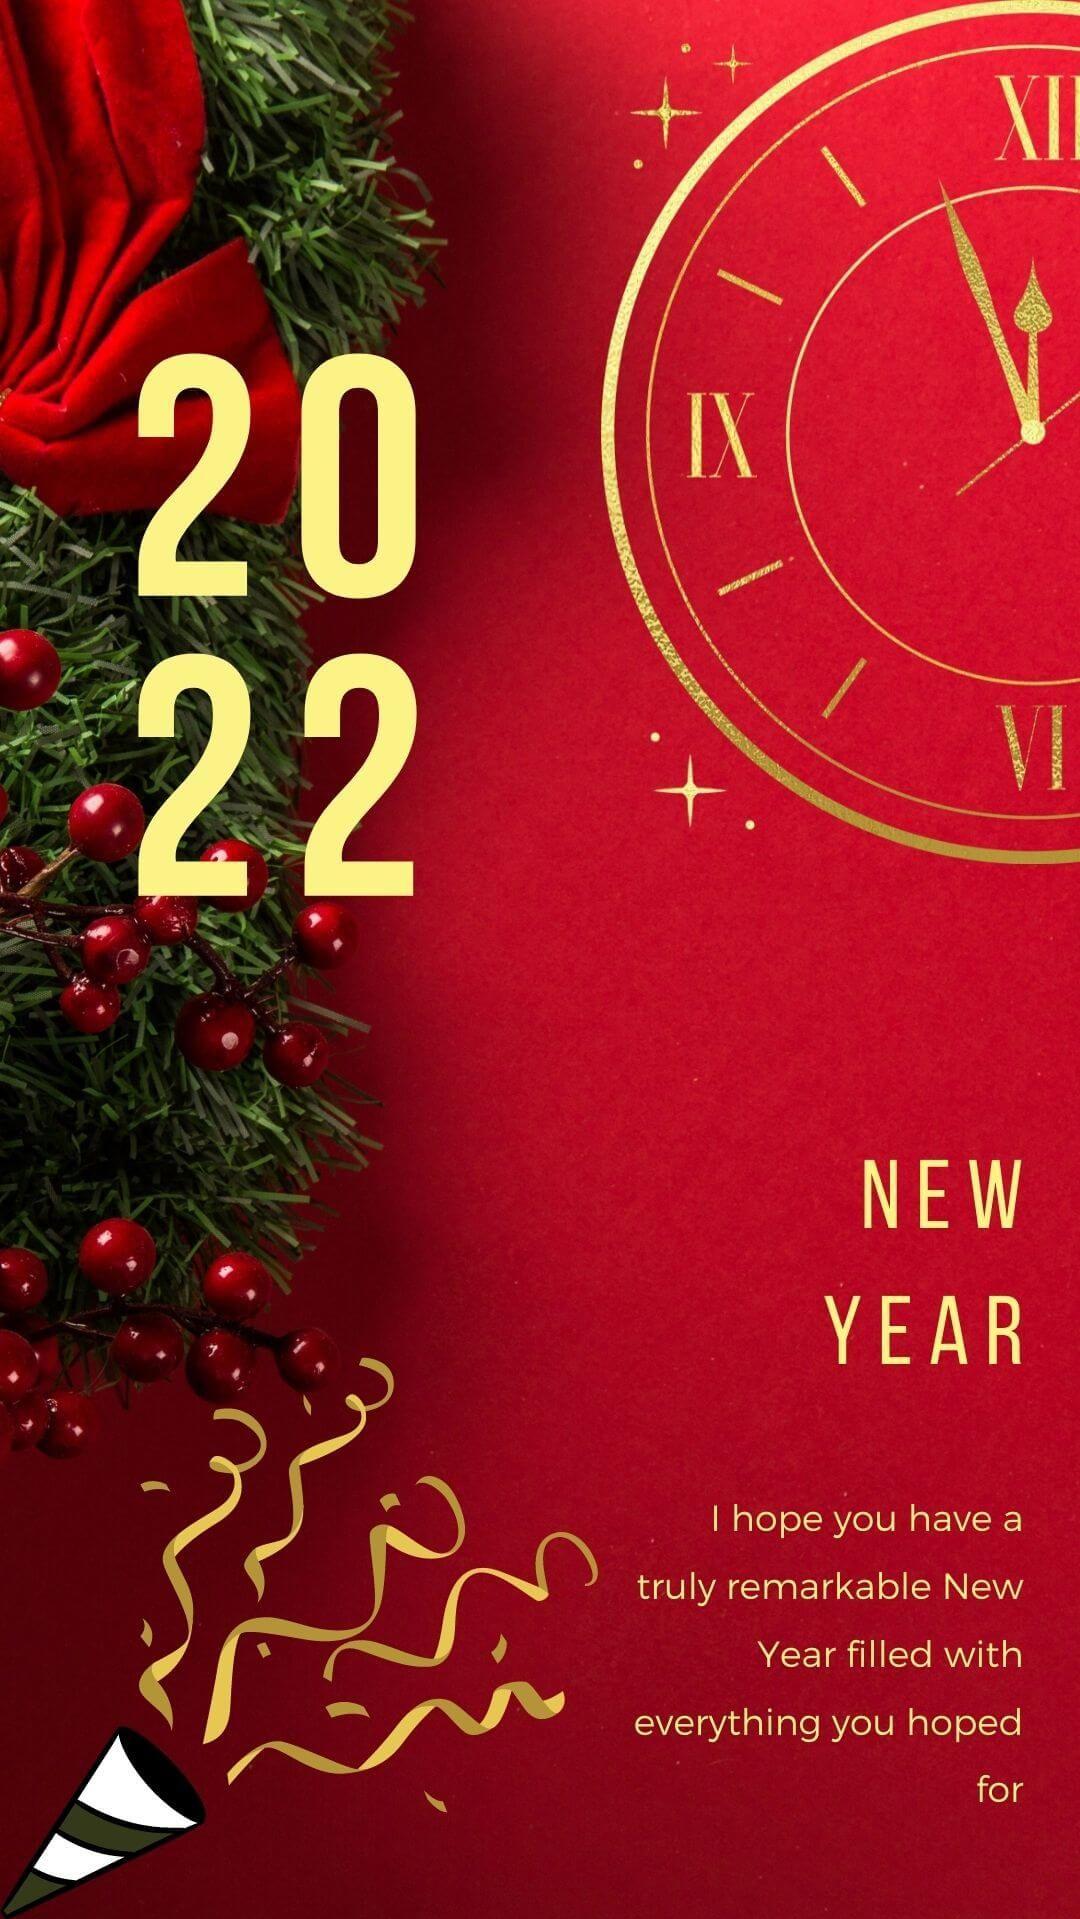 Latest New Year Wallpapers and Images for iPhone and iPad